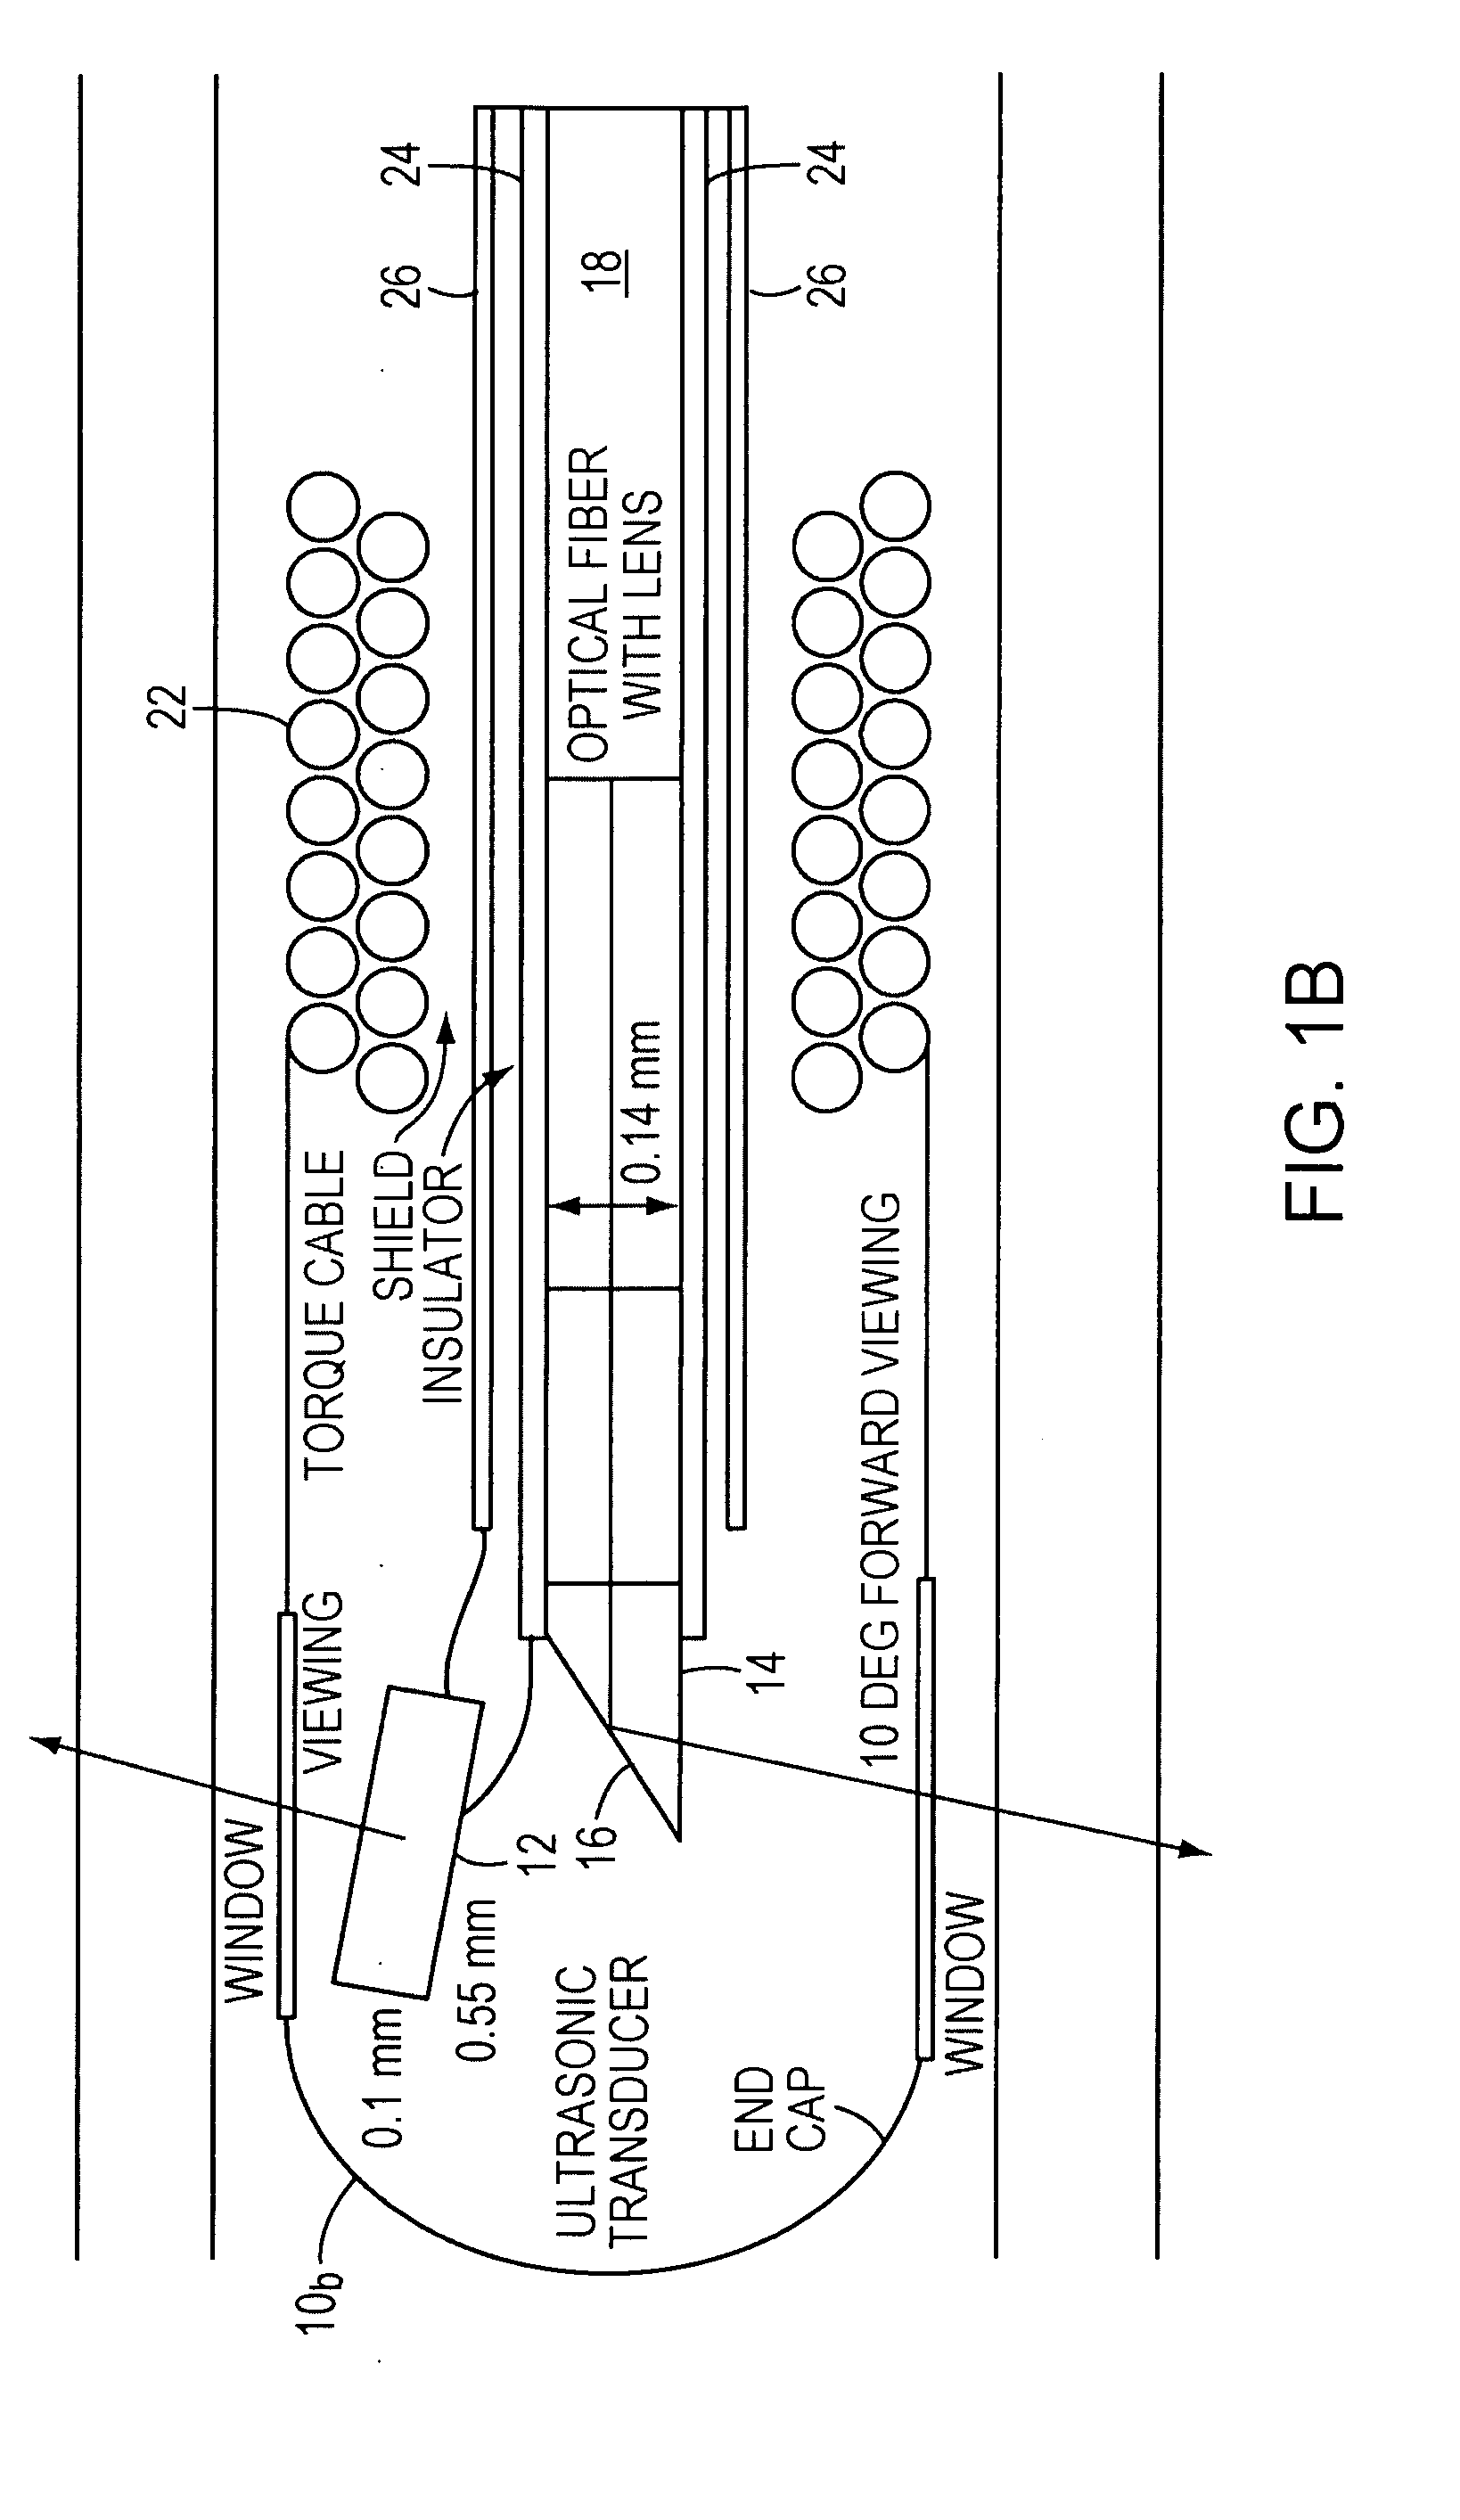 Opto-acoustic imaging devices and methods